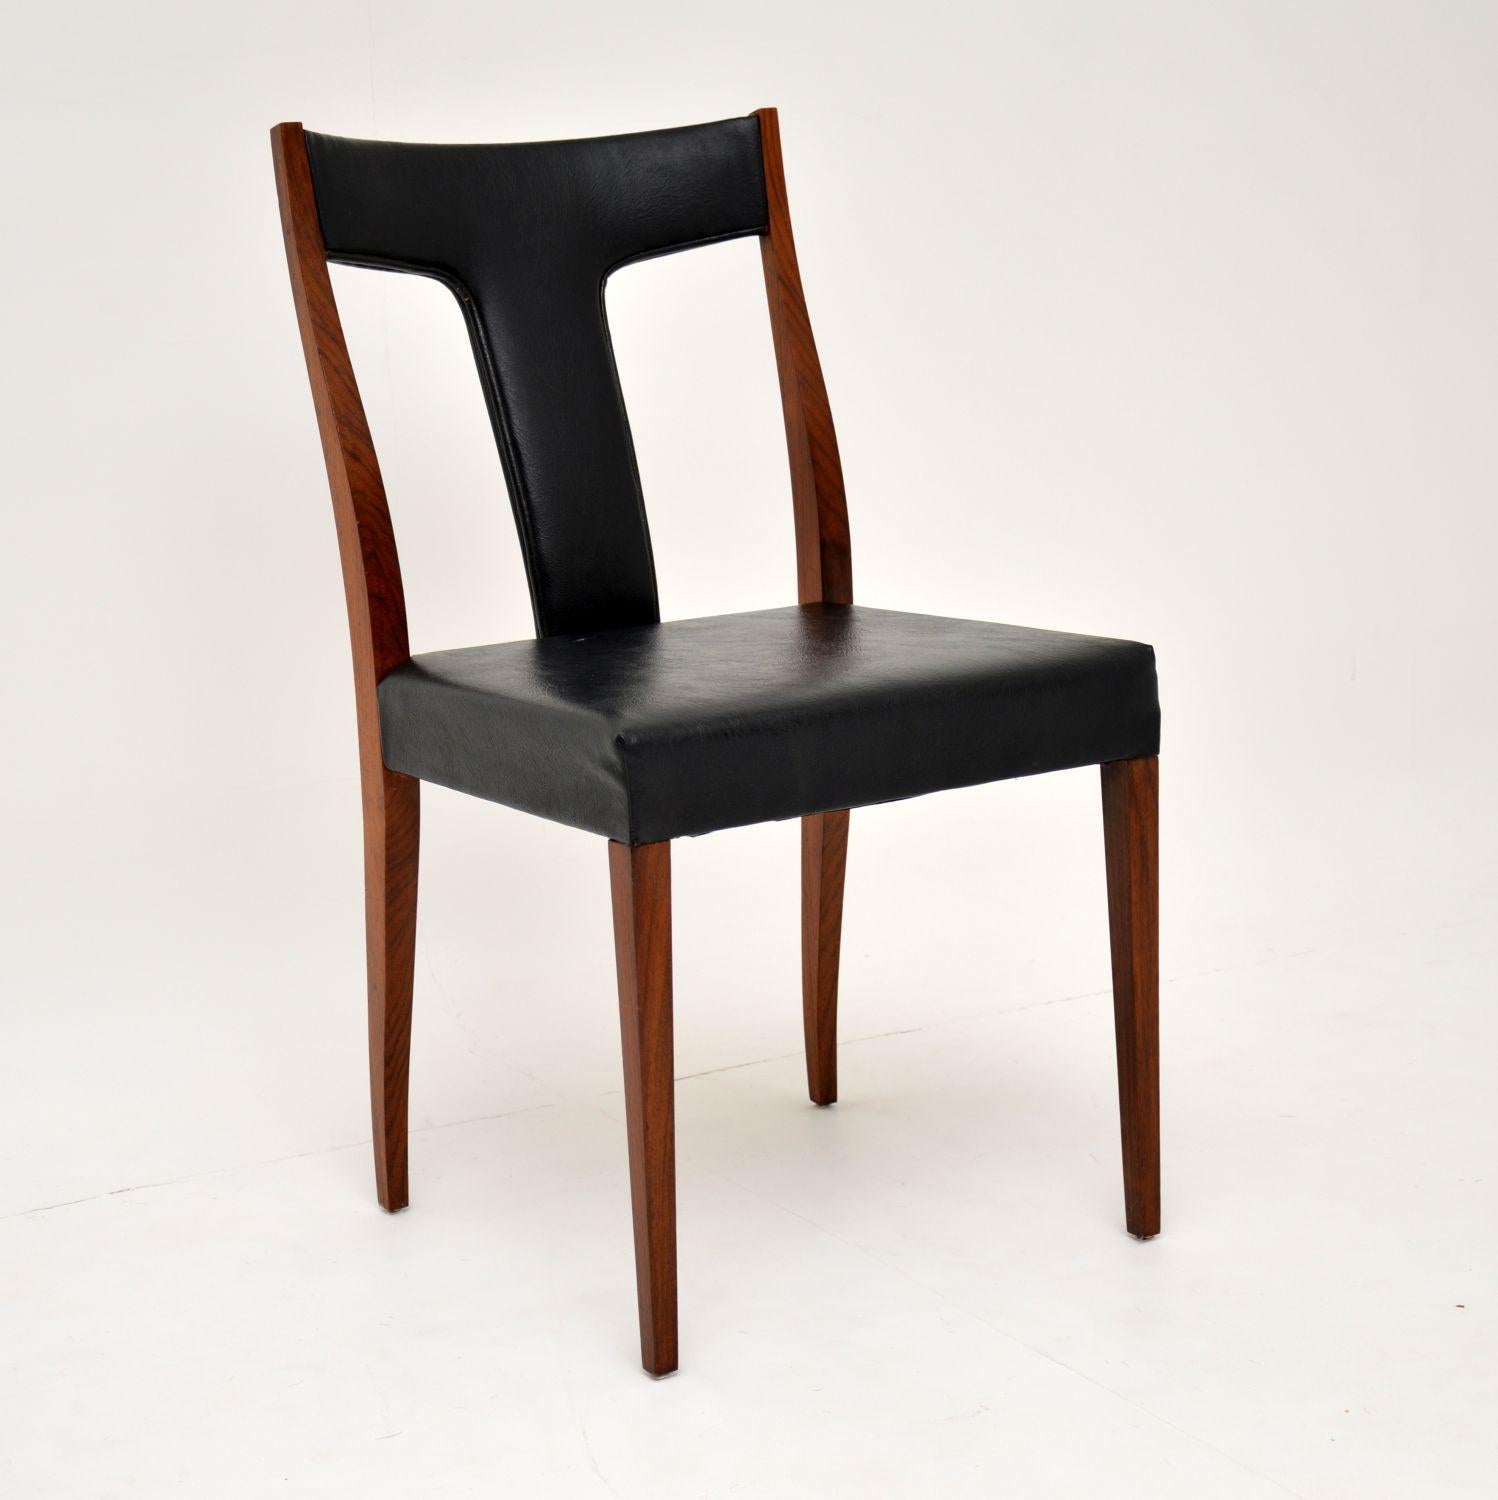 A stylish and very rare set of eight vintage dining chairs, these were designed by Robert Heritage. These chairs have a shapely and elegant design, and are also extremely comfortable. They date from the 1960s and are in superb original condition.